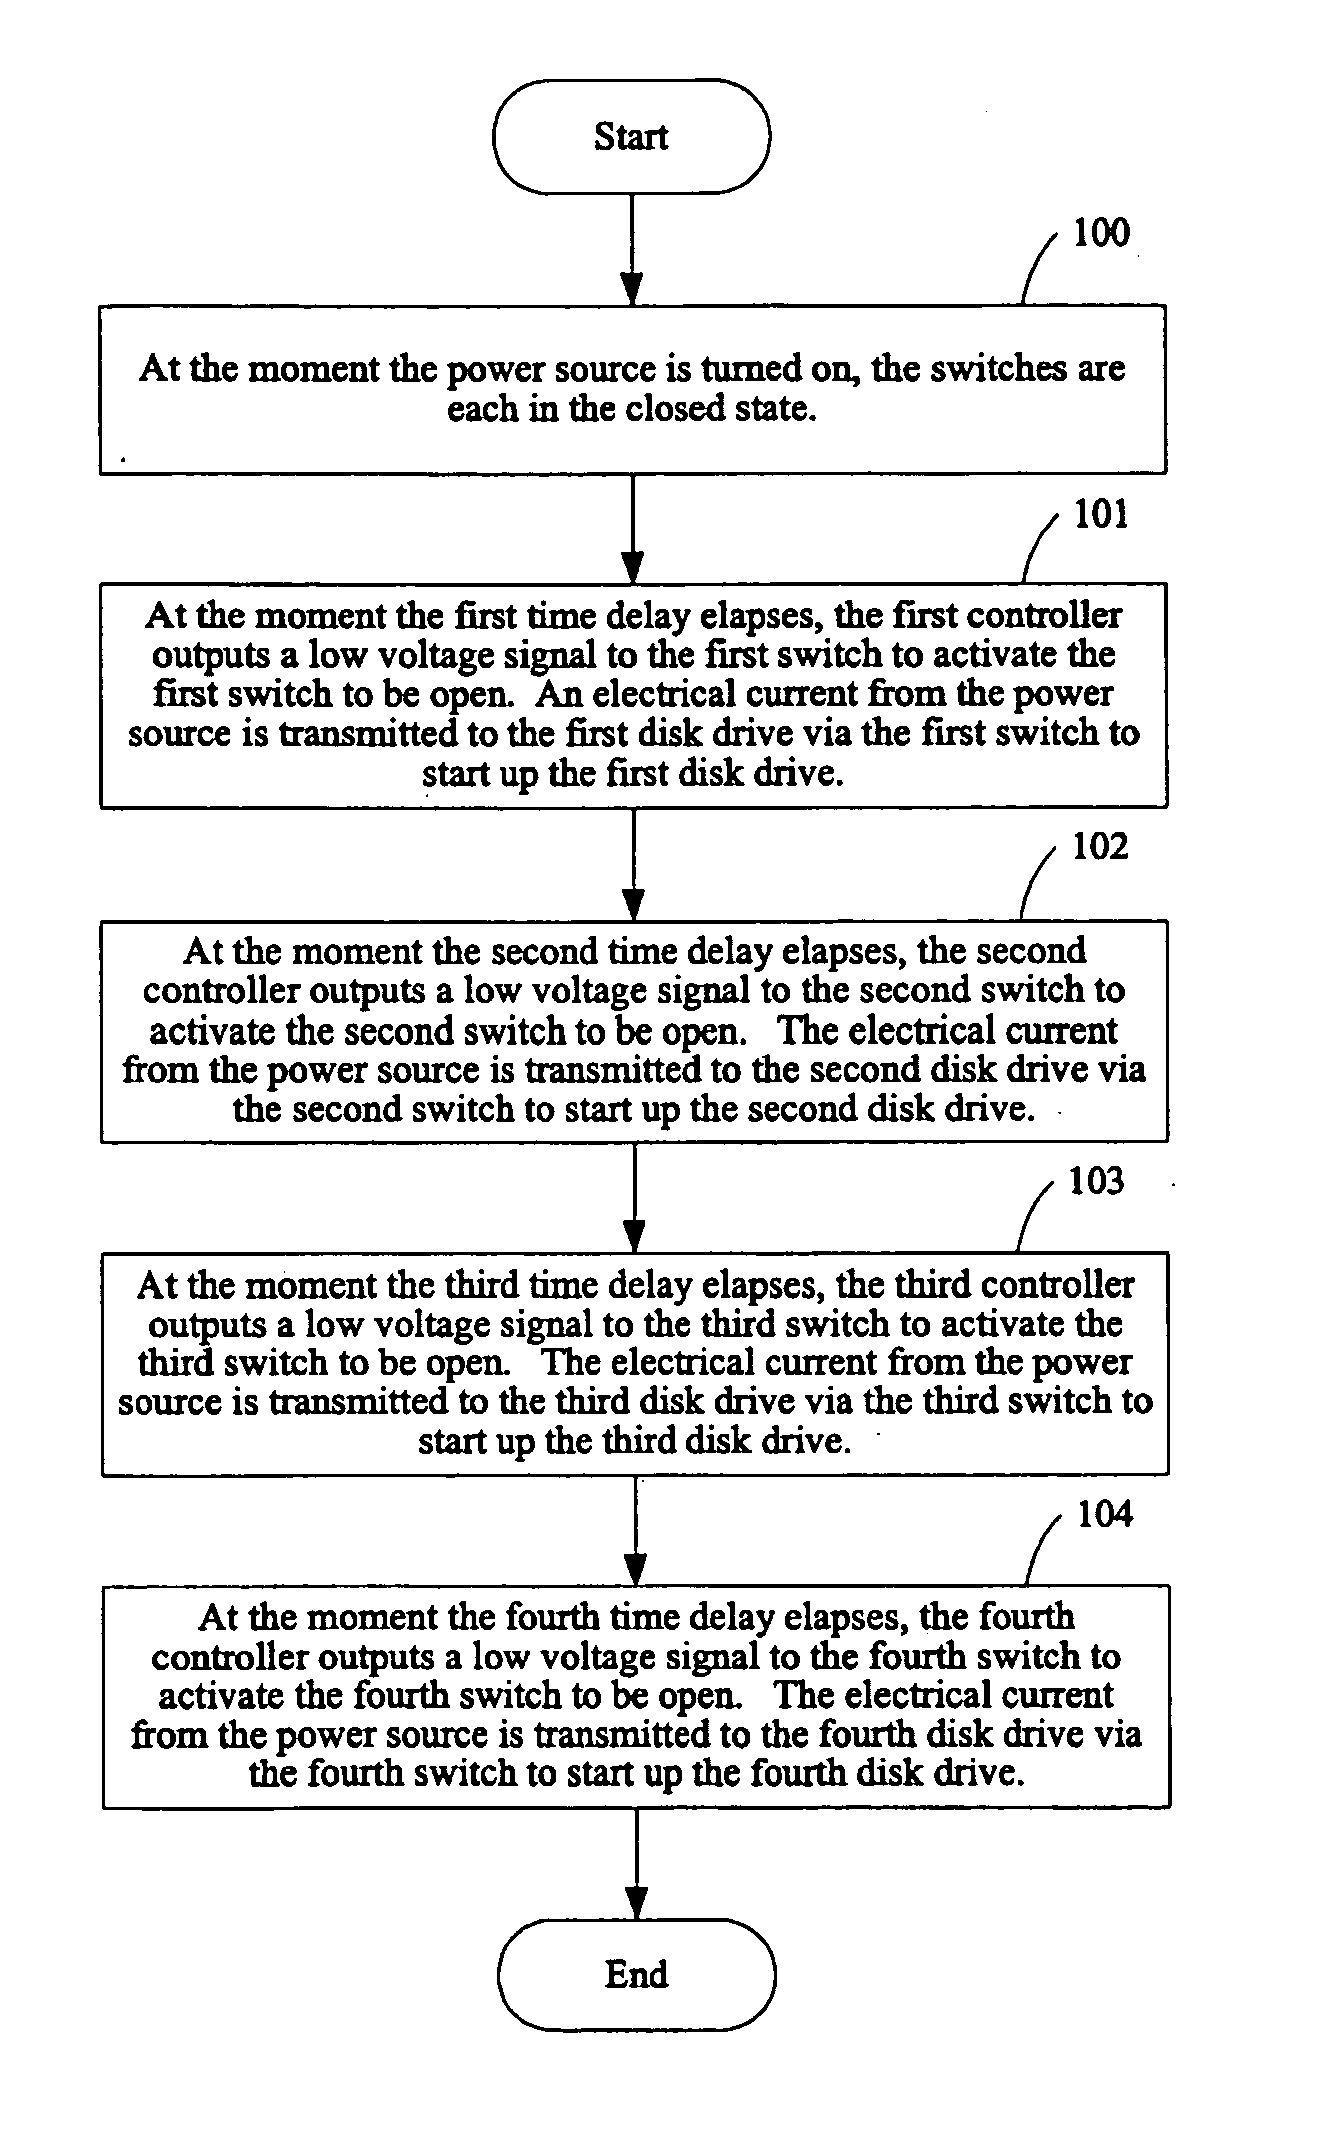 System and method for starting up plural electronic devices in an orderly manner